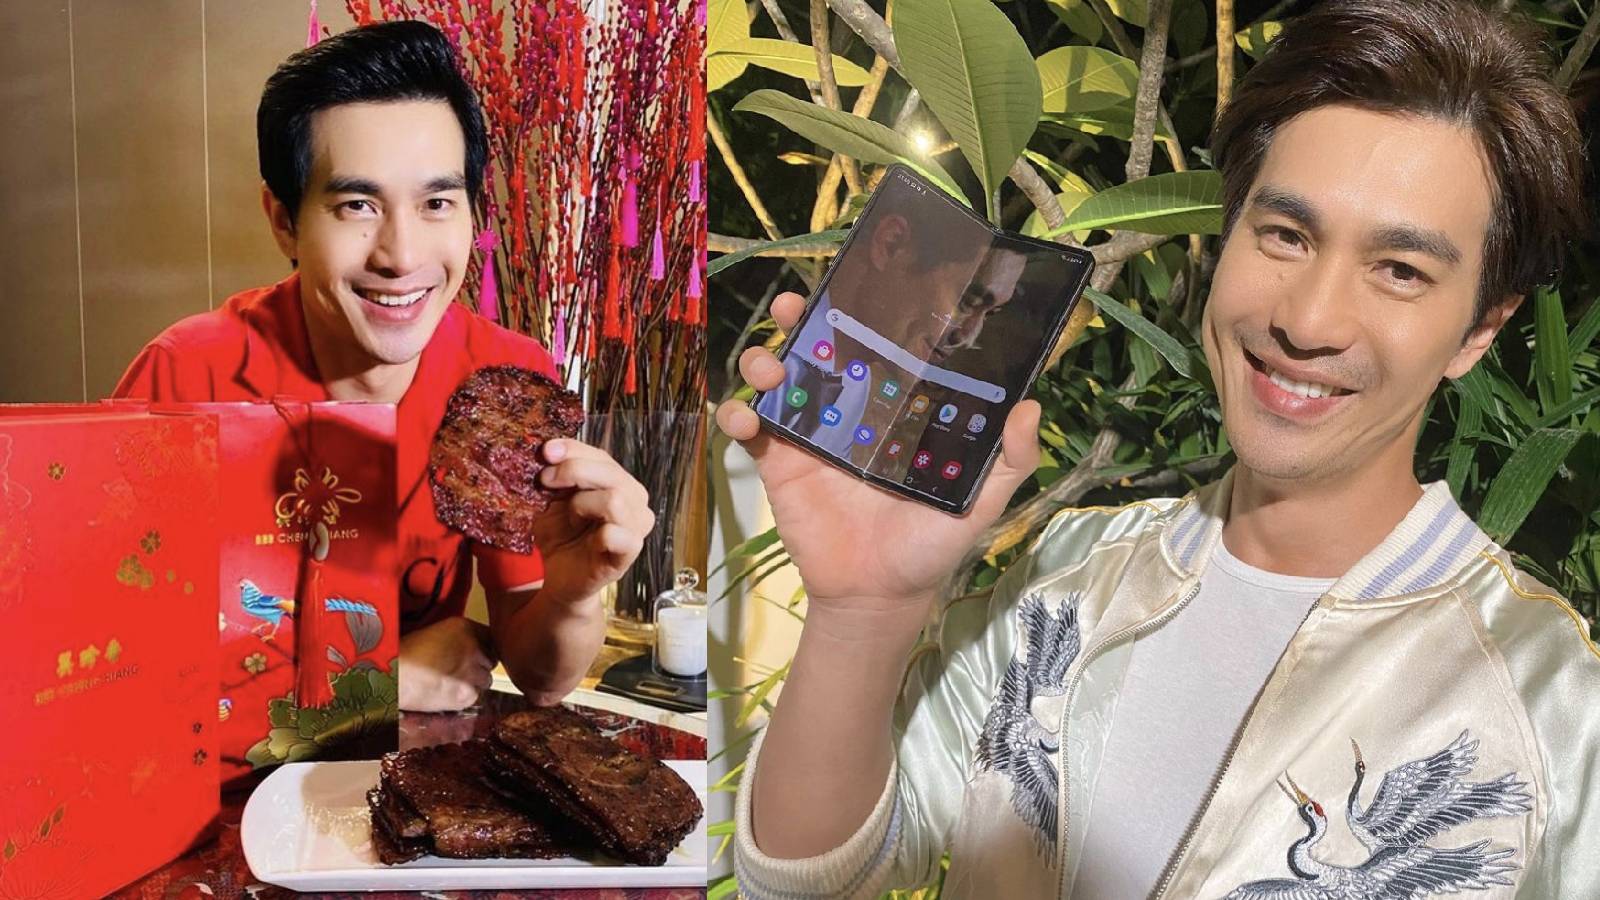 Pierre Png Reunited With A Primary School Friend Through A Mobile Game… But Not Before Setting "A Trap" For Him